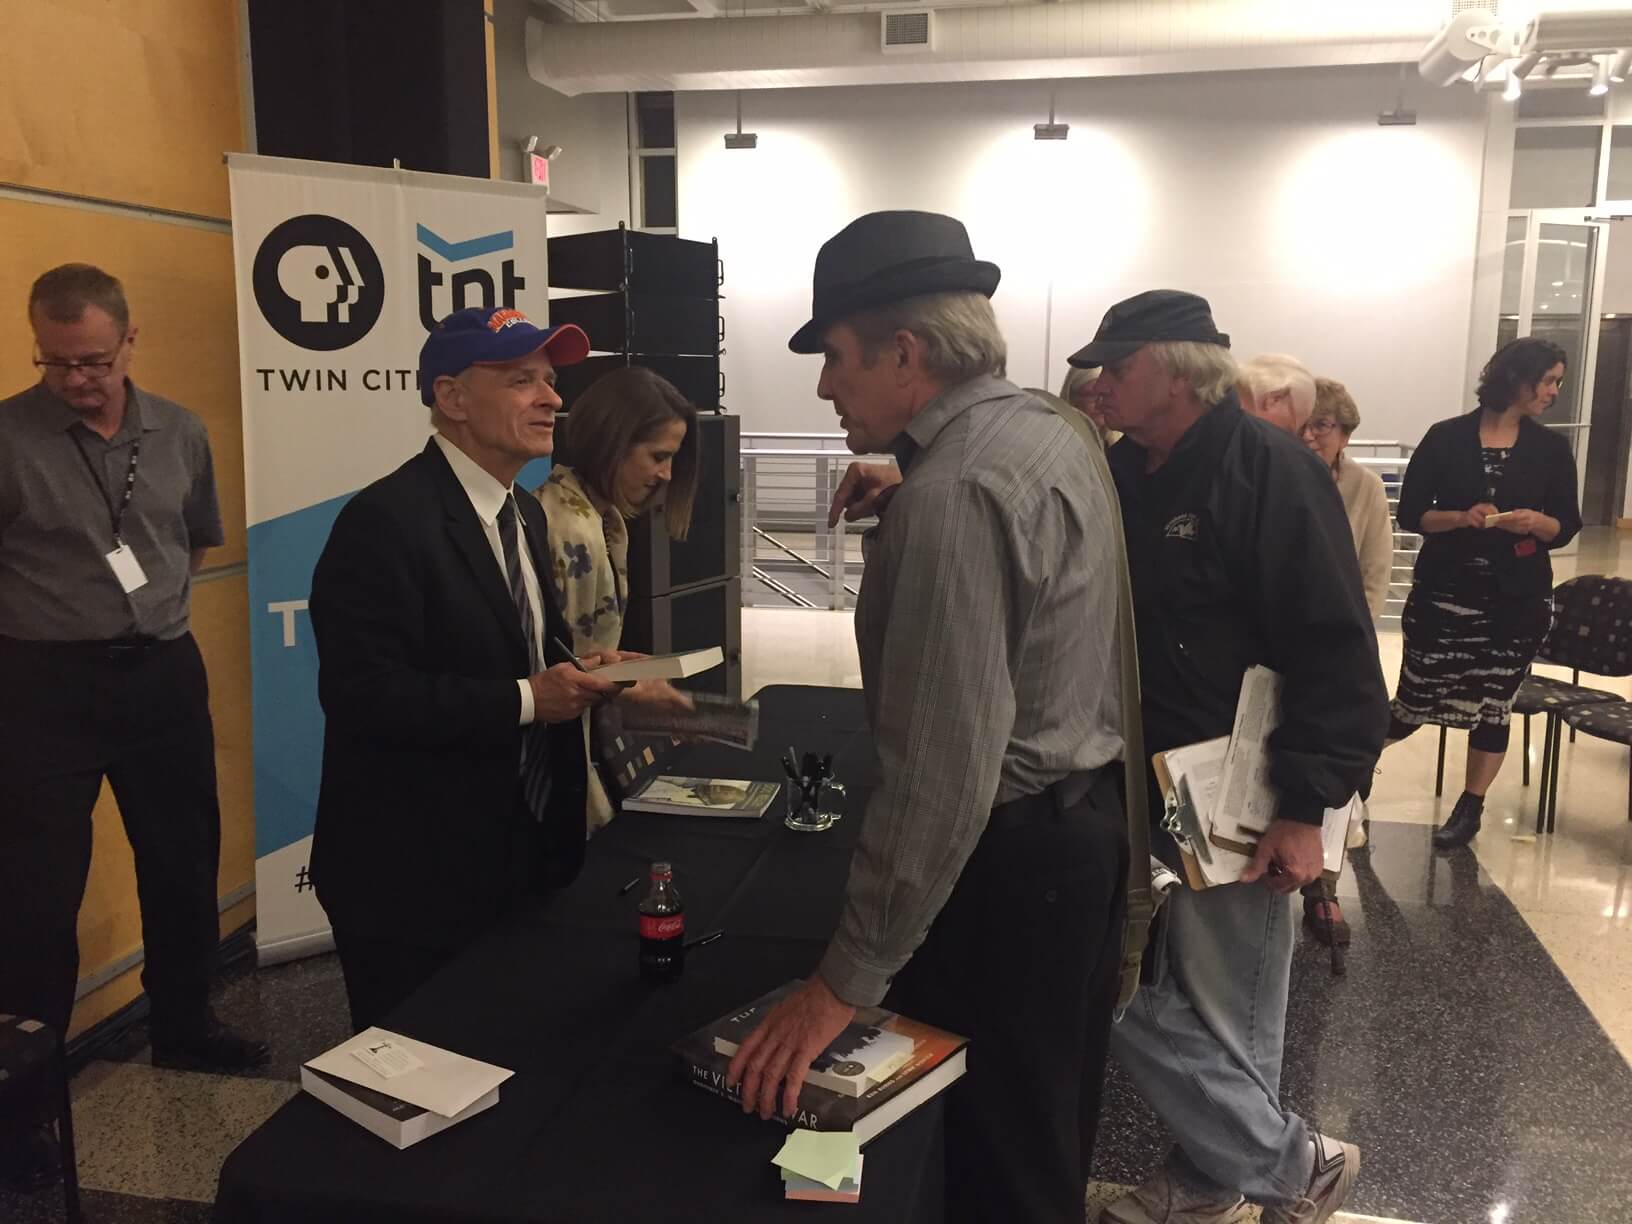 Minnesota author and Vietnam veteran Michael Maurer gives his book to Tim O'Brien after the event.